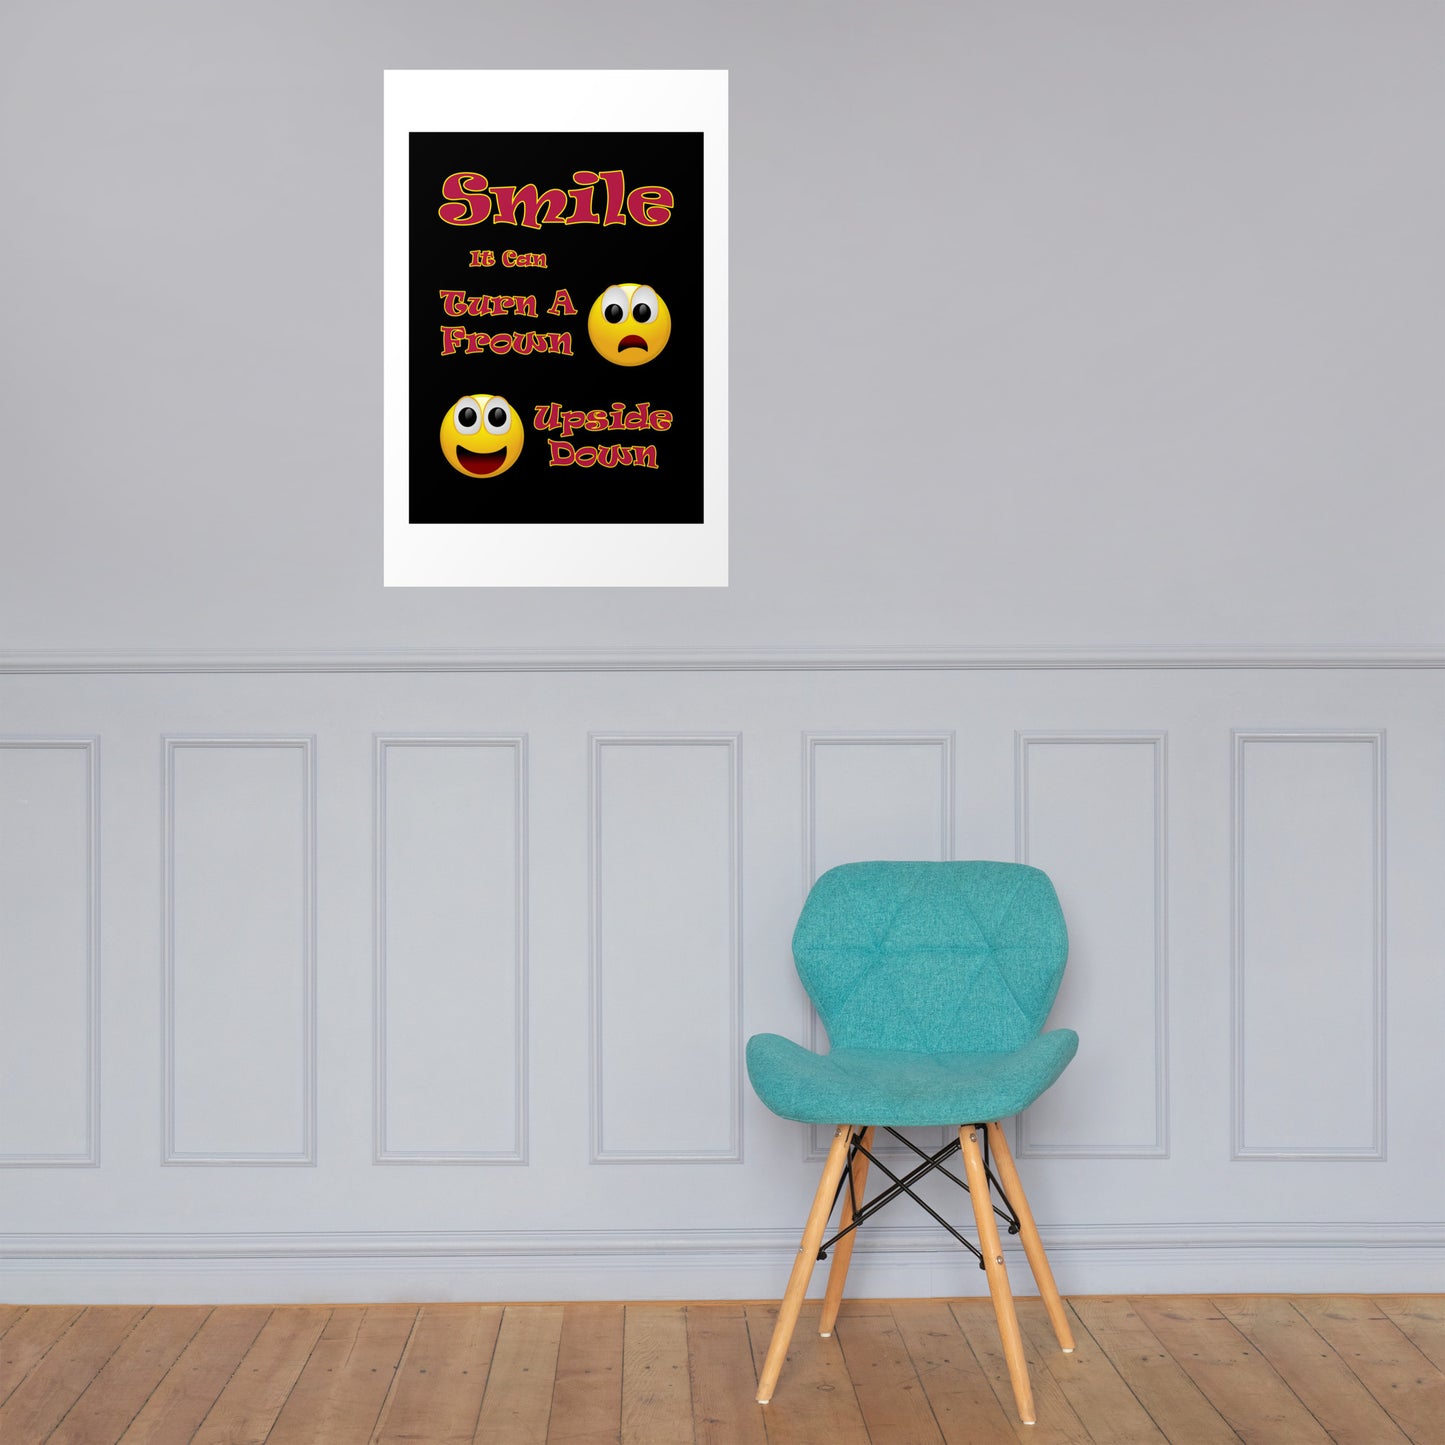 A008 Art Print - Museum Quality Giclée Print Featuring a Smiley Graphic With the Text “Smile - It Can Turn a Frown Upside Down”